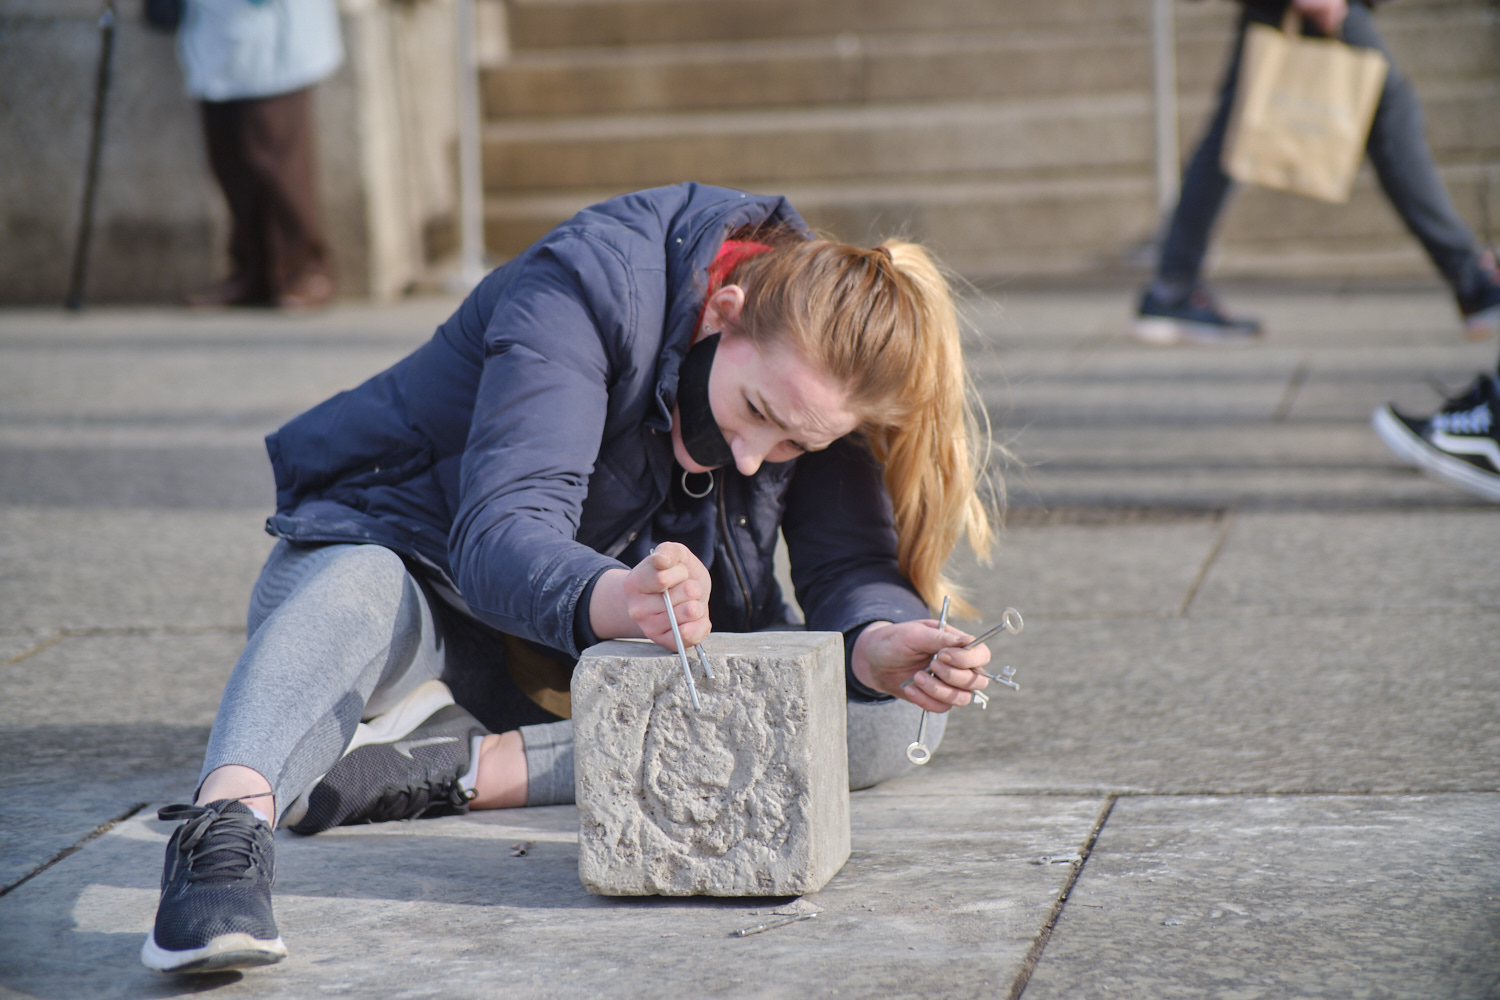 An artist performs with black tape on her mouth, she sits on the floor and carves a block of stone with keys.